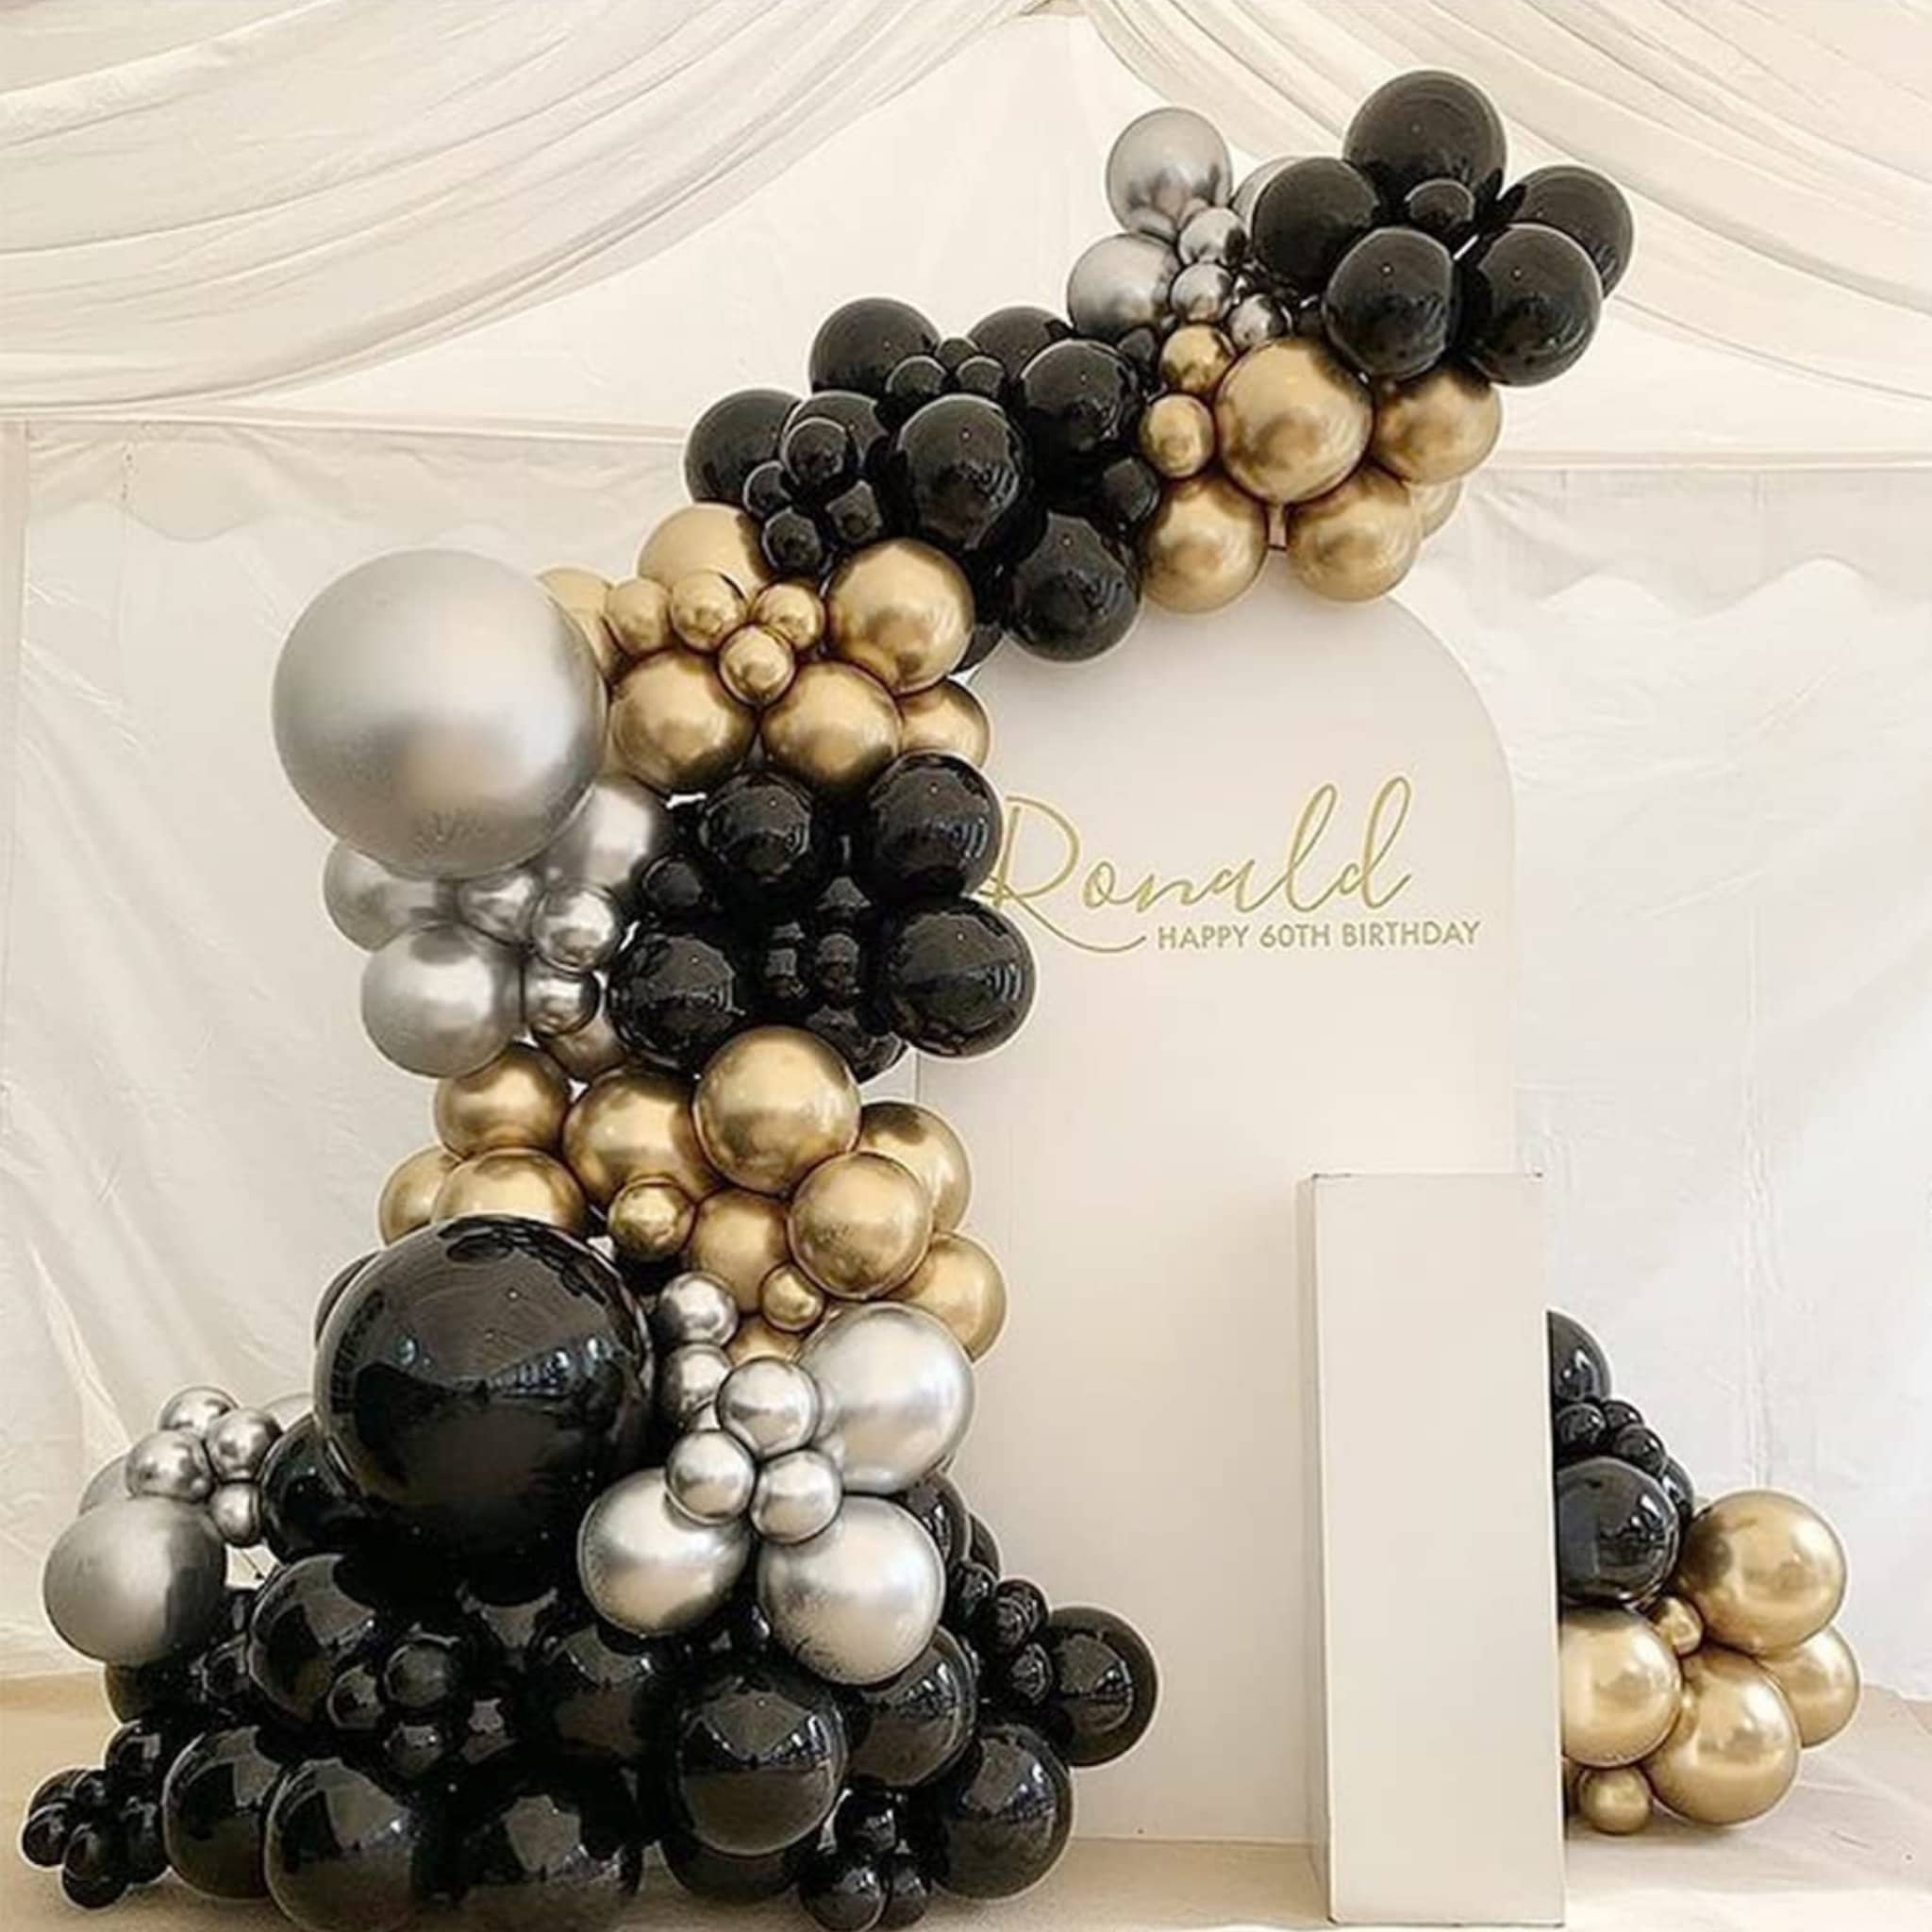 50th Birthday Decorations Kit - Gold Black and Silver Color